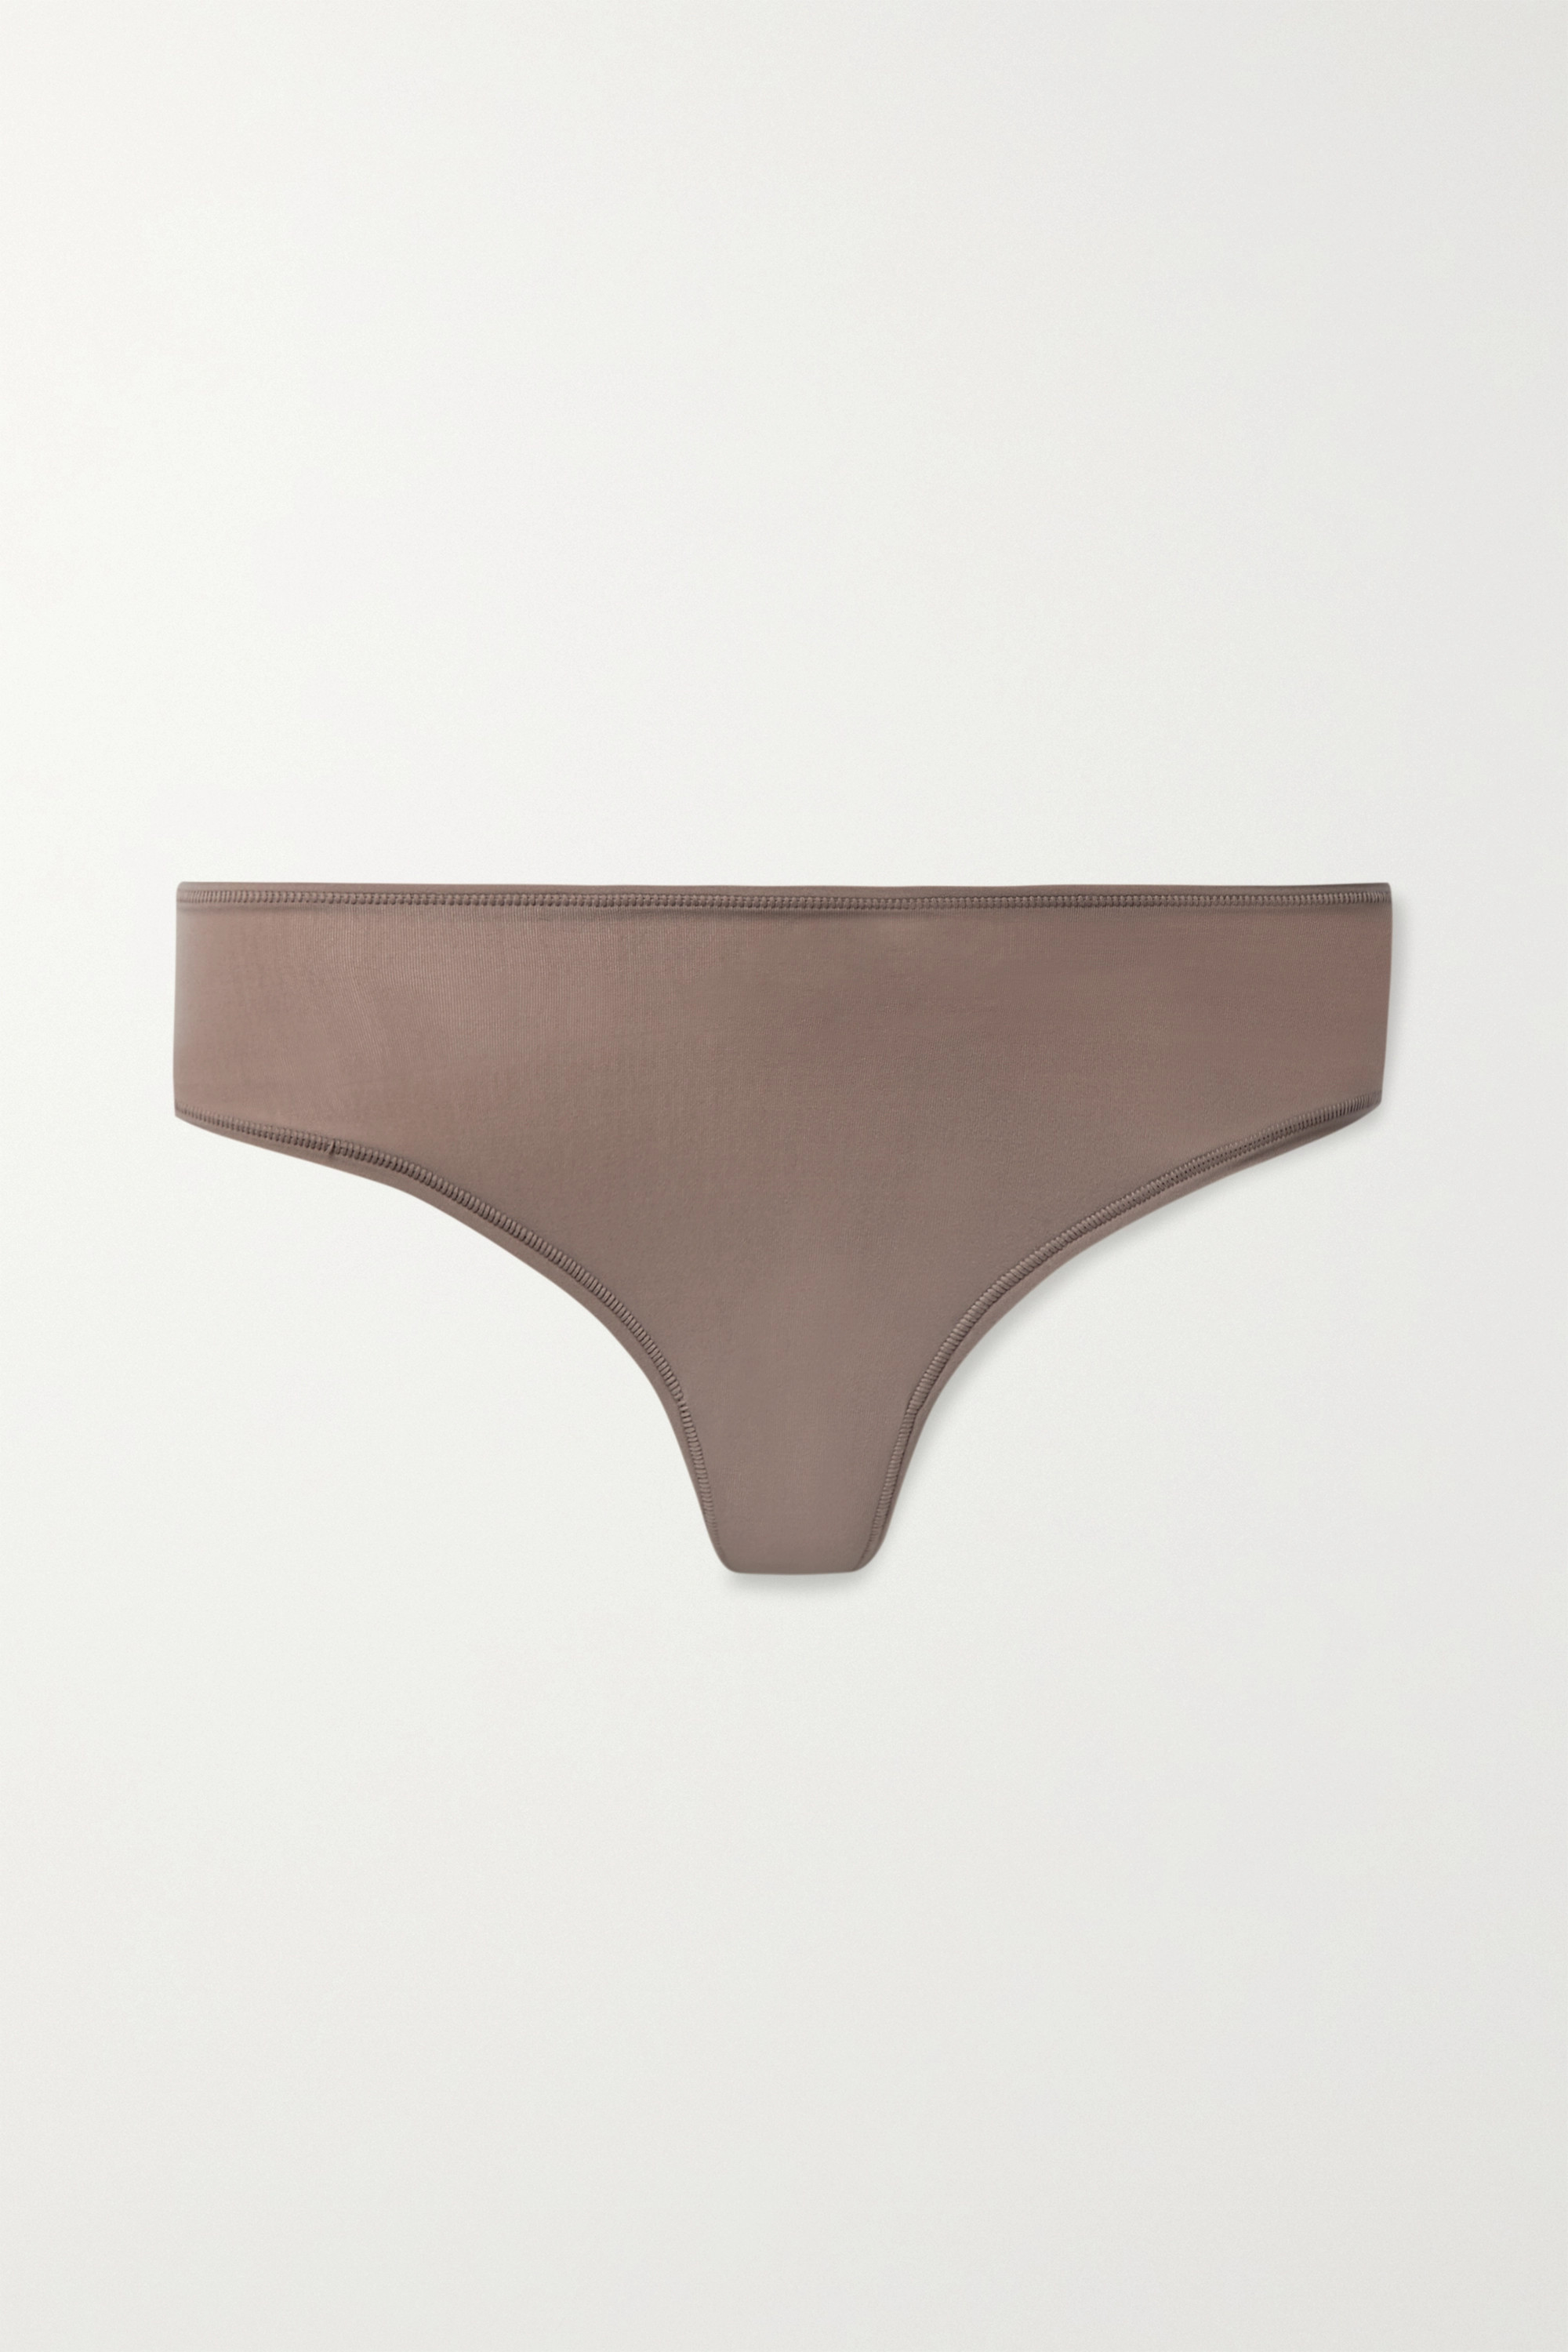 SKIMS + Fits Everybody Thong in Umber